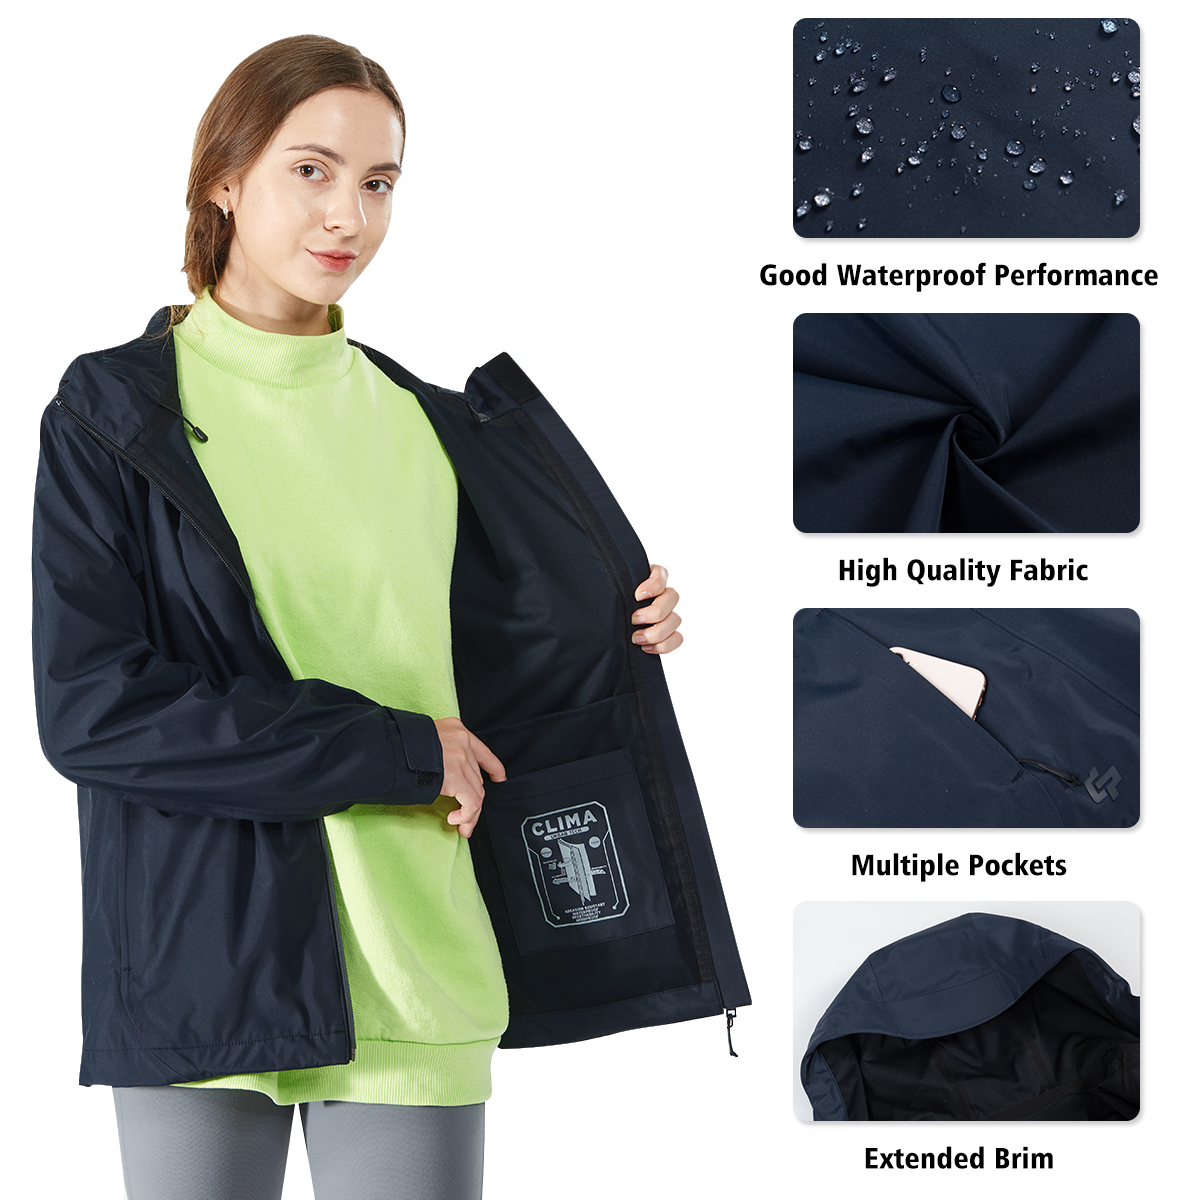 Gymax Women' Waterproof Jacket Hooded Coat w/Cuff Camping Navy Size L - image 7 of 10